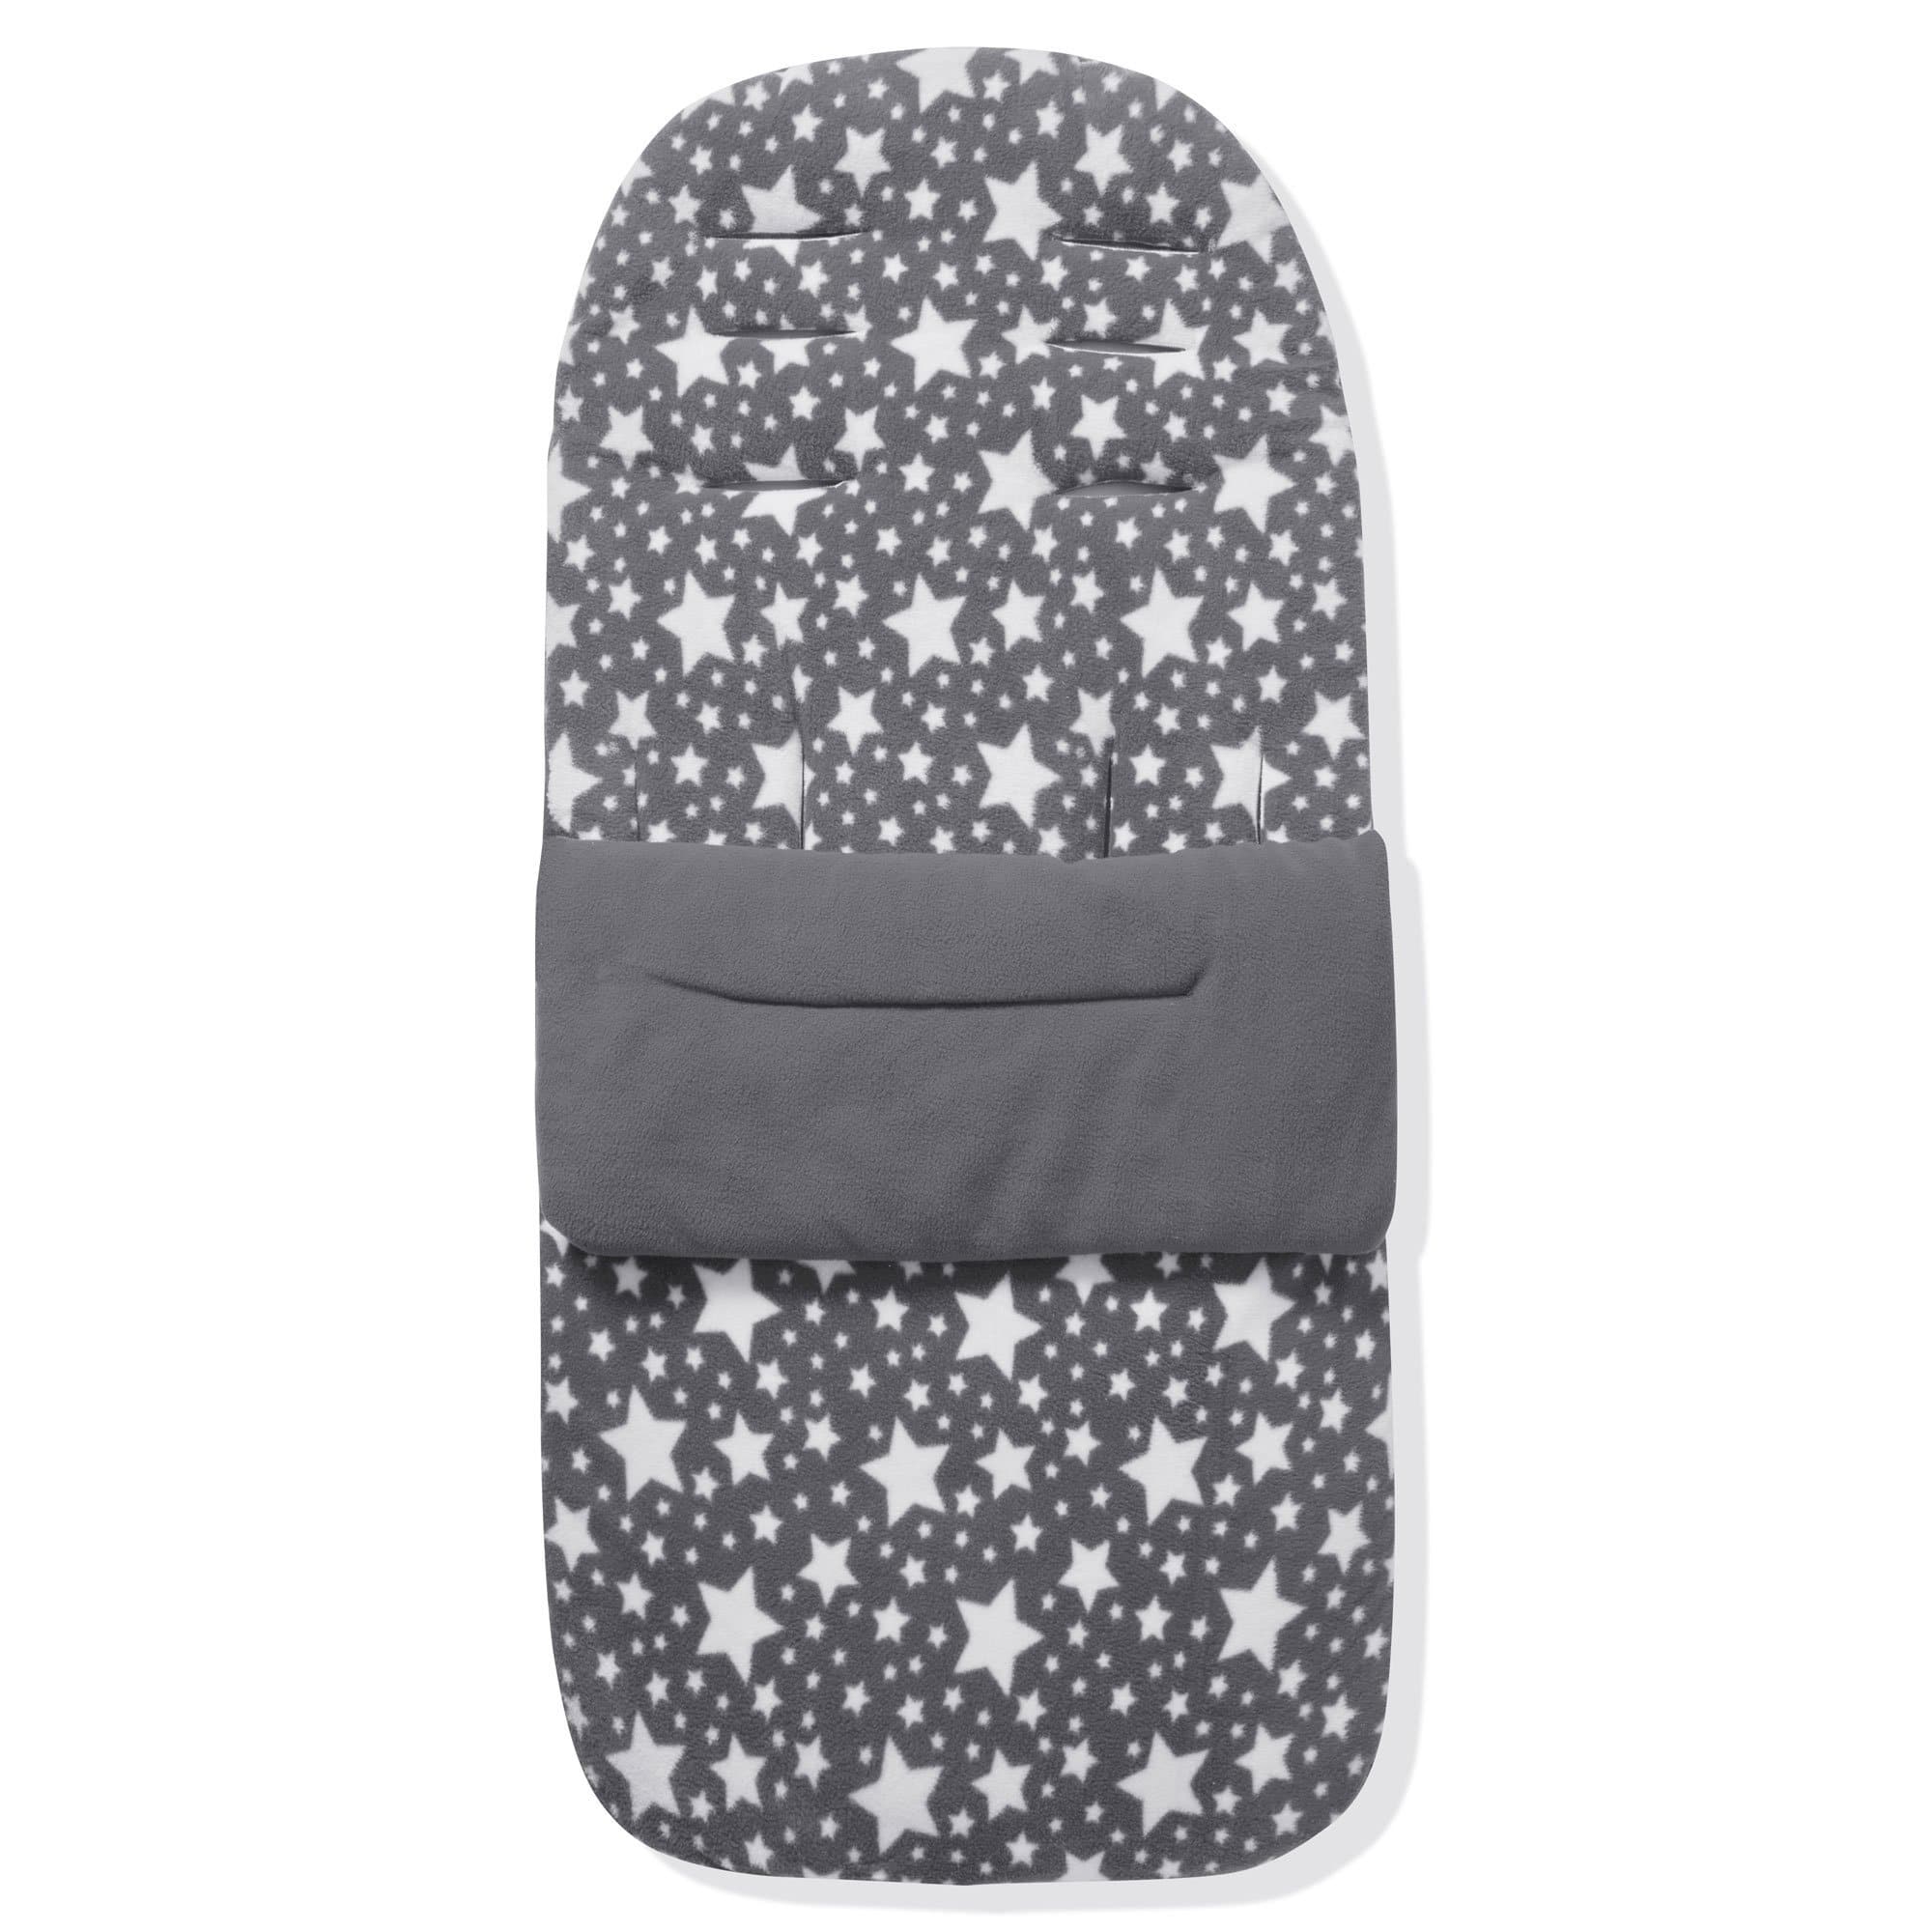 Fleece Footmuff / Cosy Toes Compatible With Concord - Grey Star / Fits All Models | For Your Little One